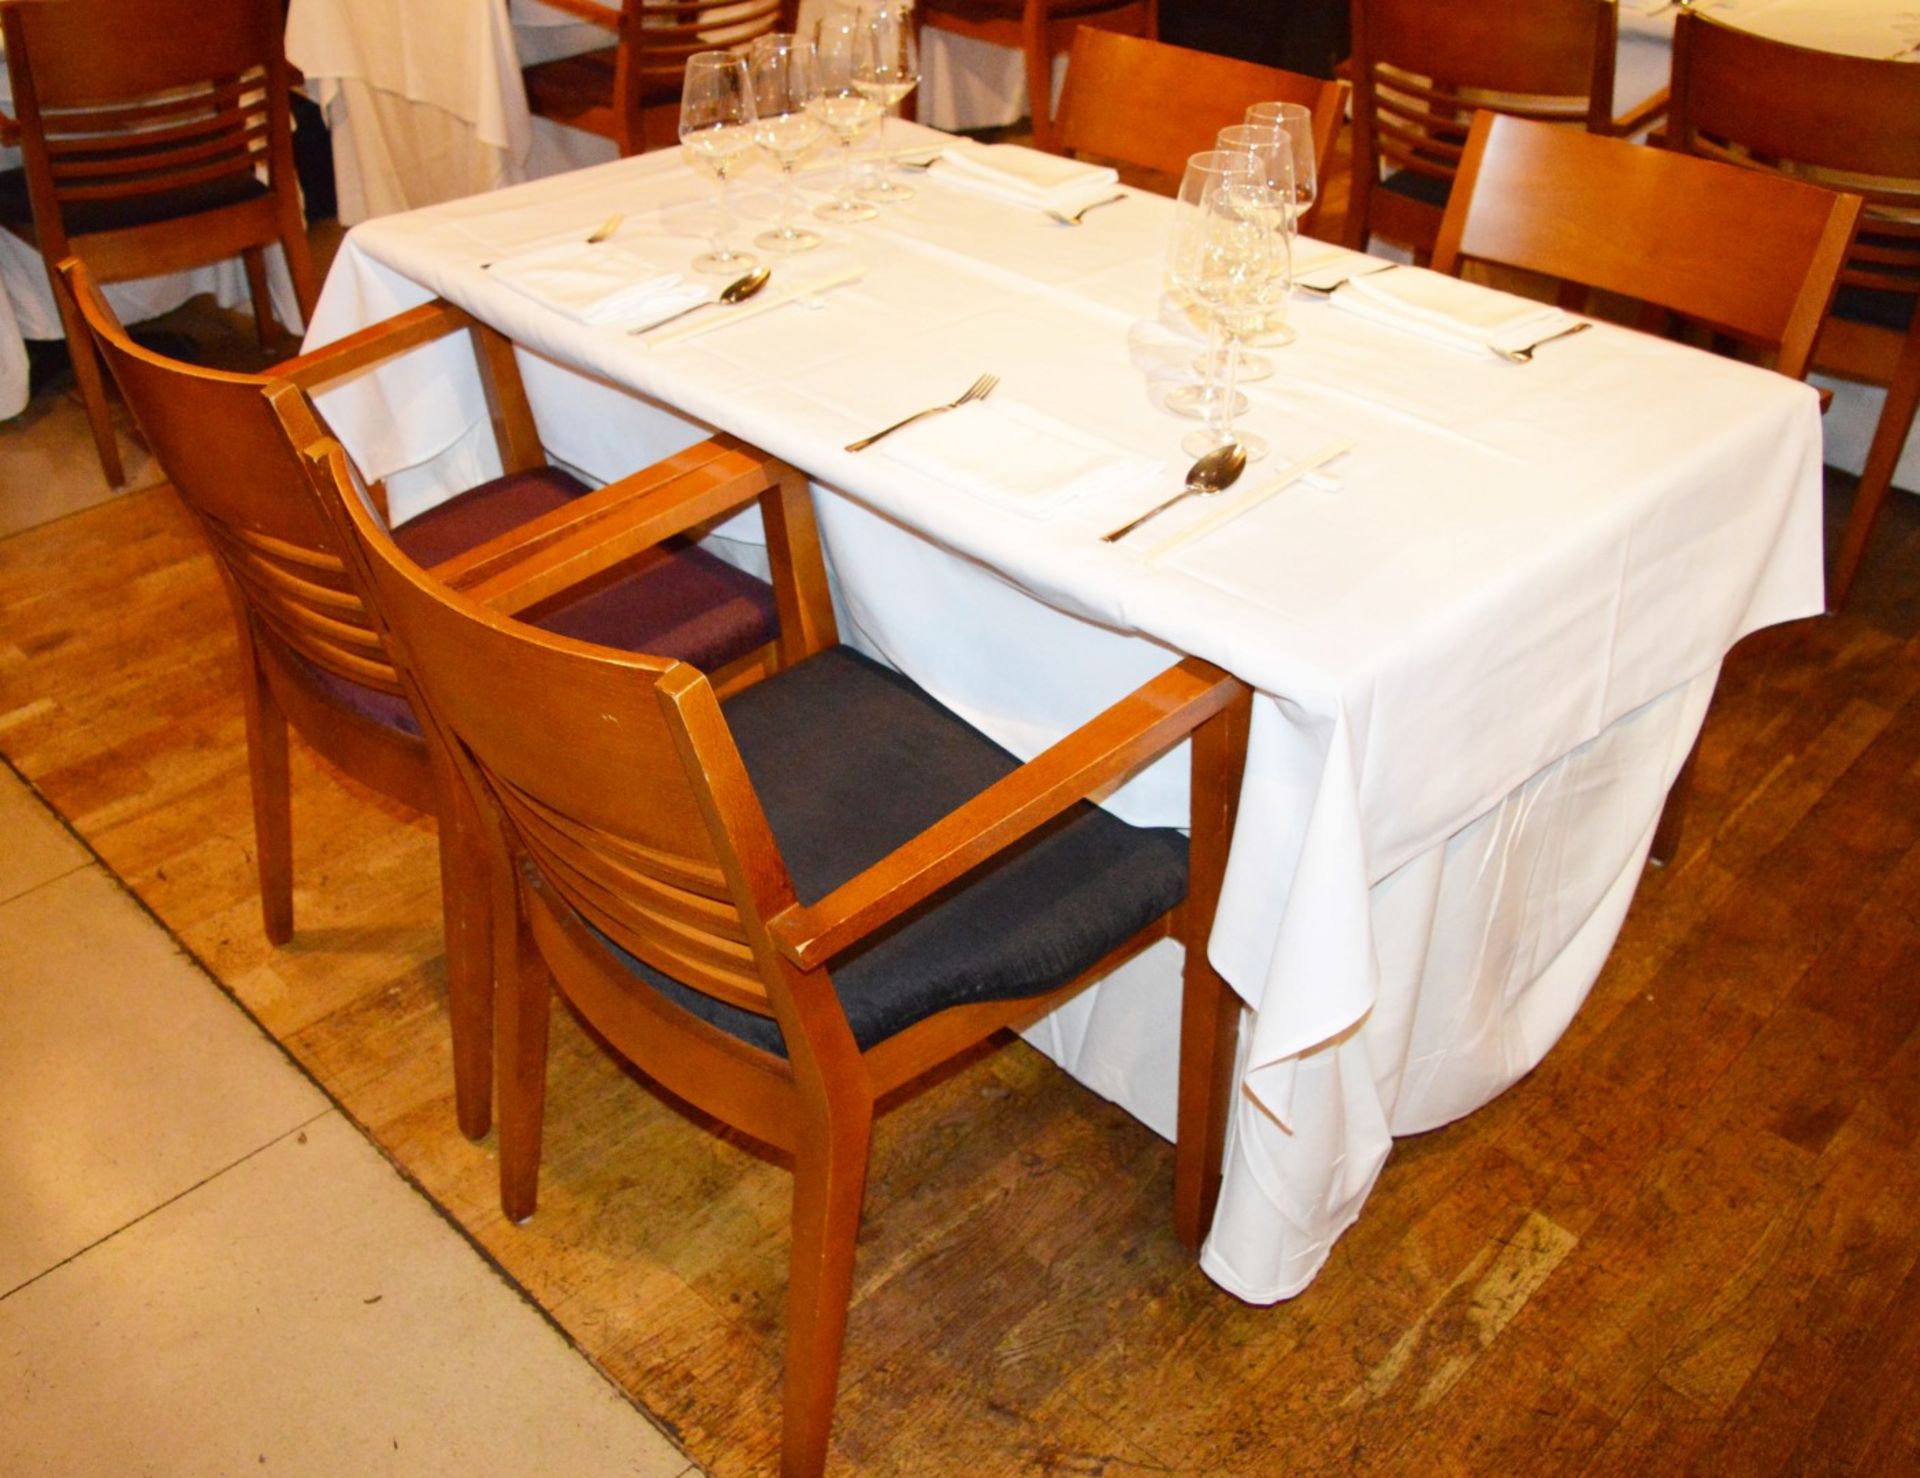 1 x Rectangular Dining Table and Four Solid Wood Chairs - Commercial Restaurant Table and Chair - Image 3 of 9